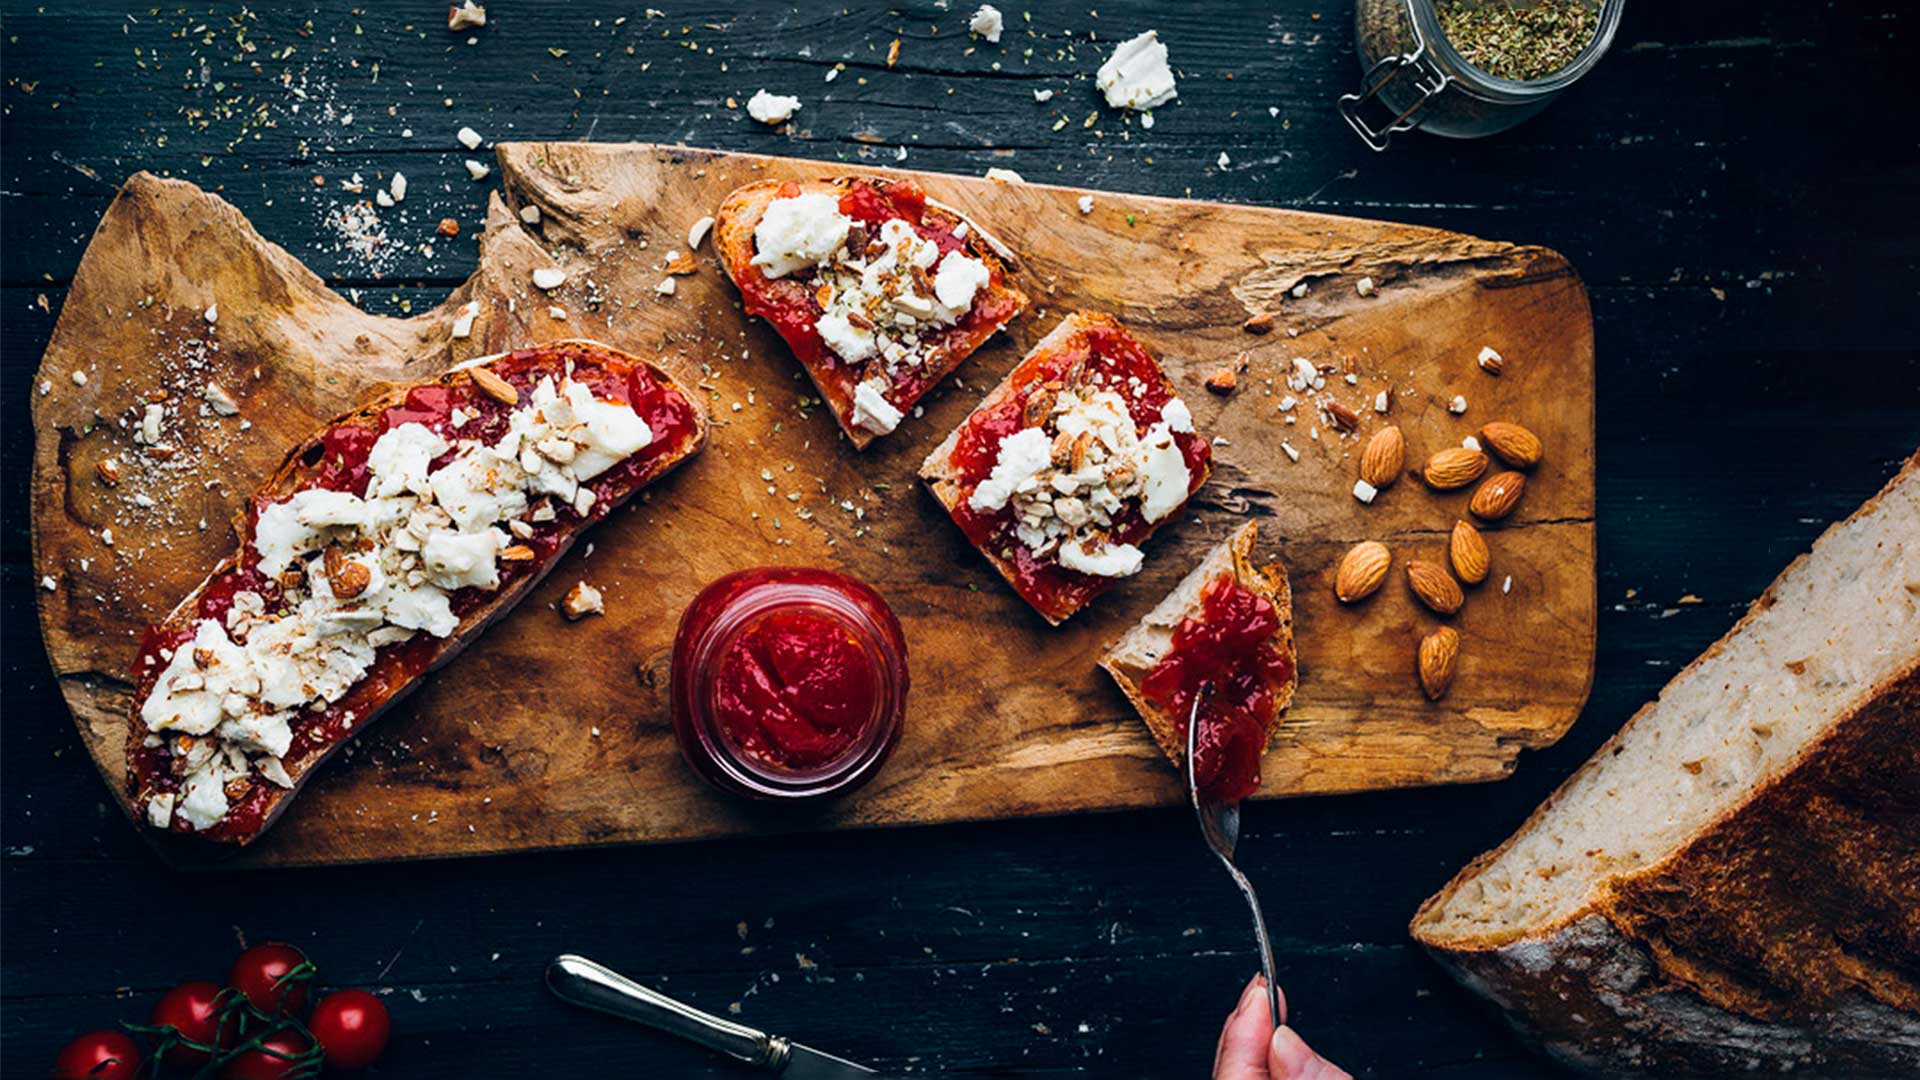 Tomato marmalade, goat cheese, and almondpintxo from Vizcaya, Basque country